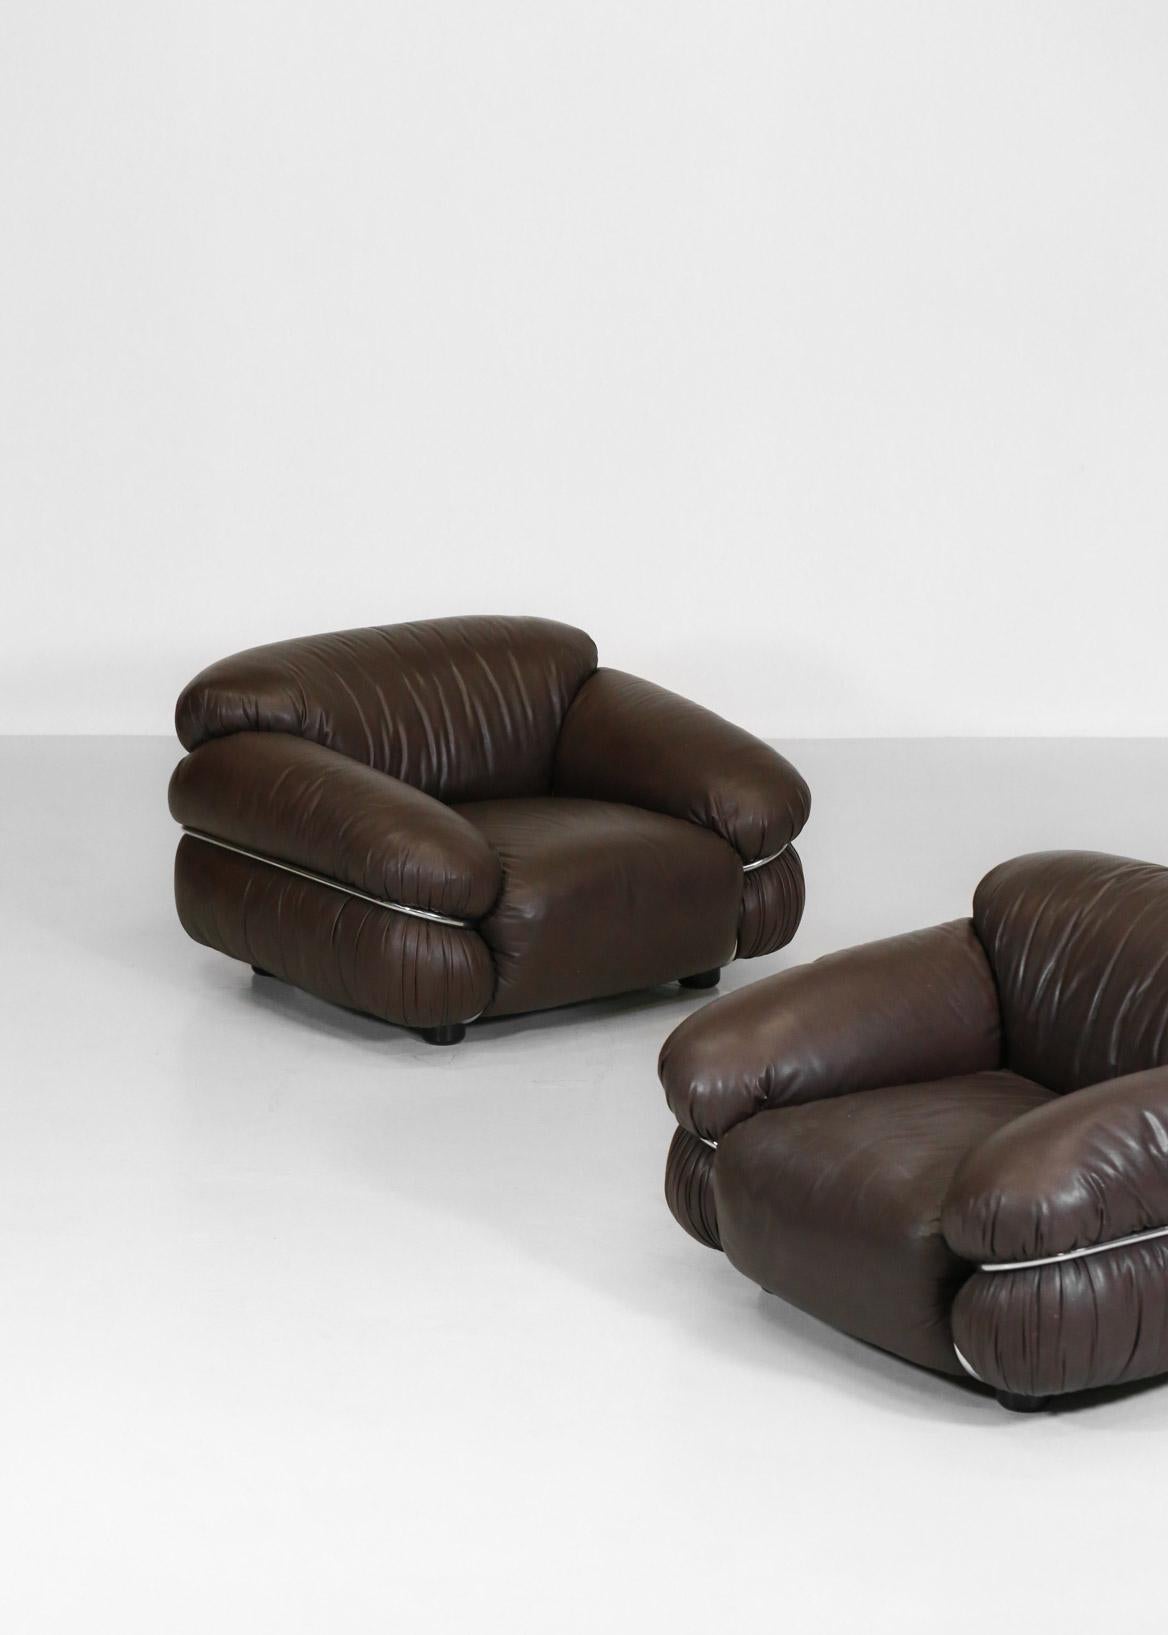 Pair of Sesann Armchairs by Gianfranco Fratinni in Leather for Cassina Italian In Excellent Condition For Sale In Lyon, FR